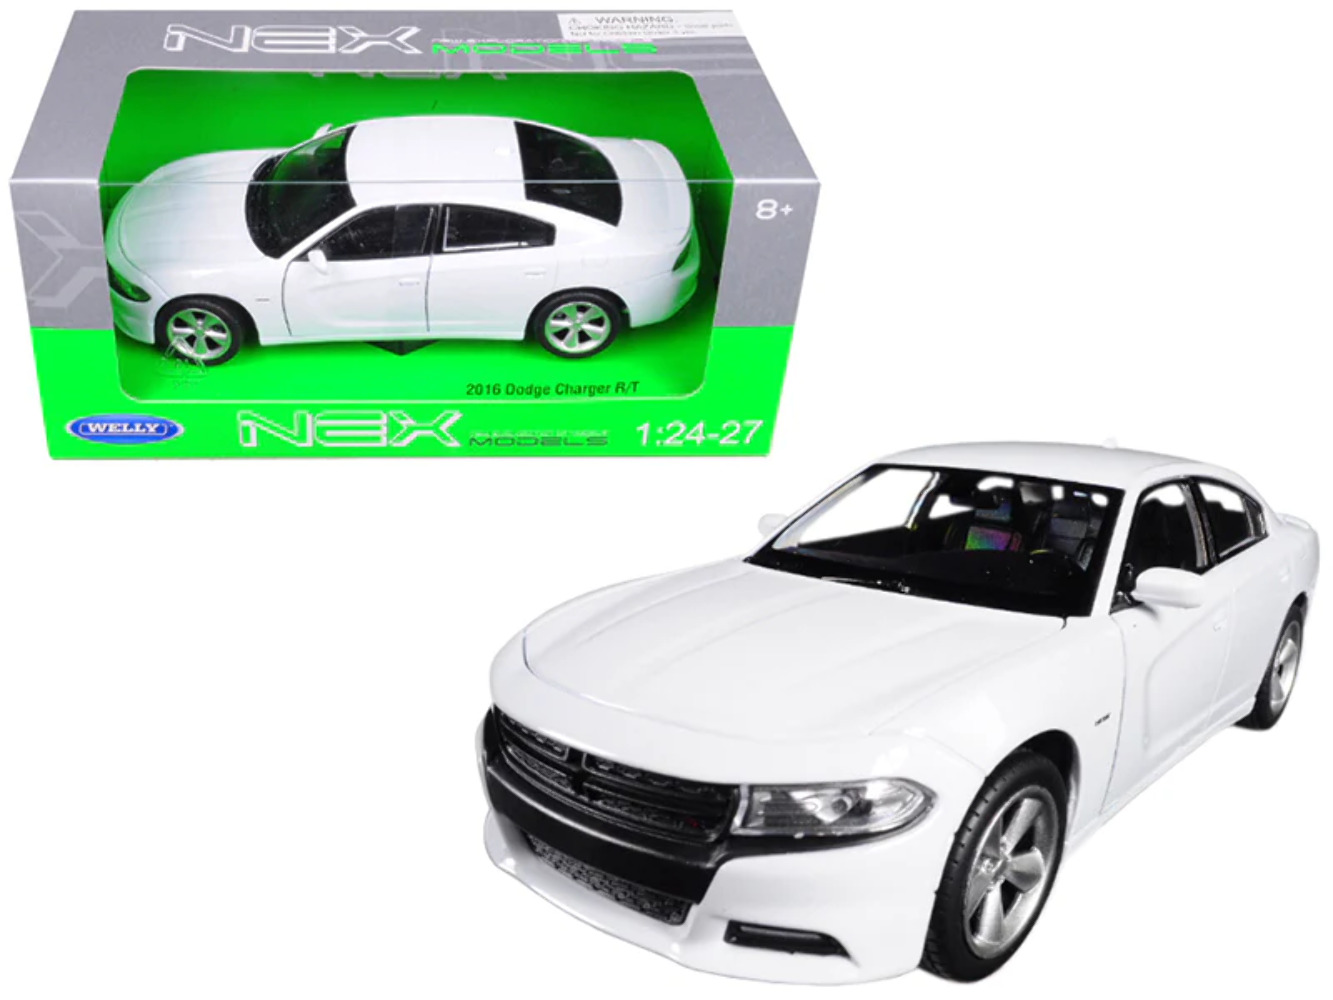 2016 Dodge Charger R/T White 1/24-1/27 Diecast Model Car